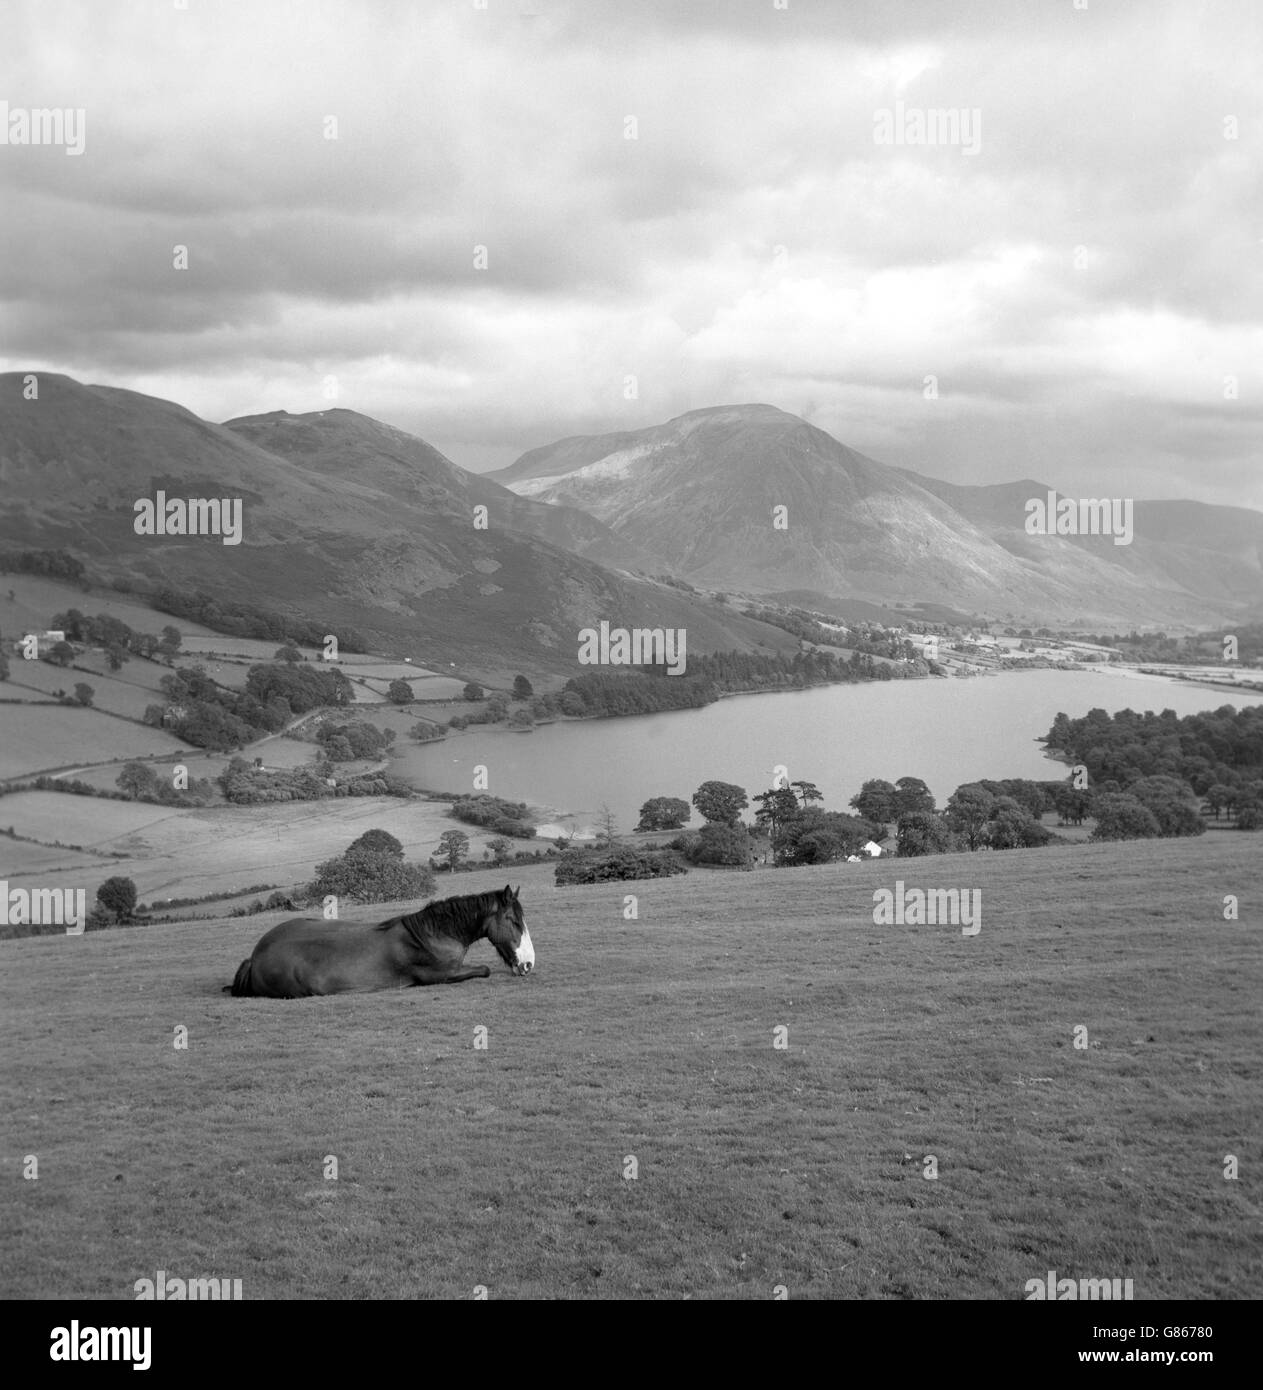 A view from Fangs Brow in the Lake District, looking over Loweswater, which has the greatest elevation of any English lake. The mountain on the right is Grasmoor. Stock Photo